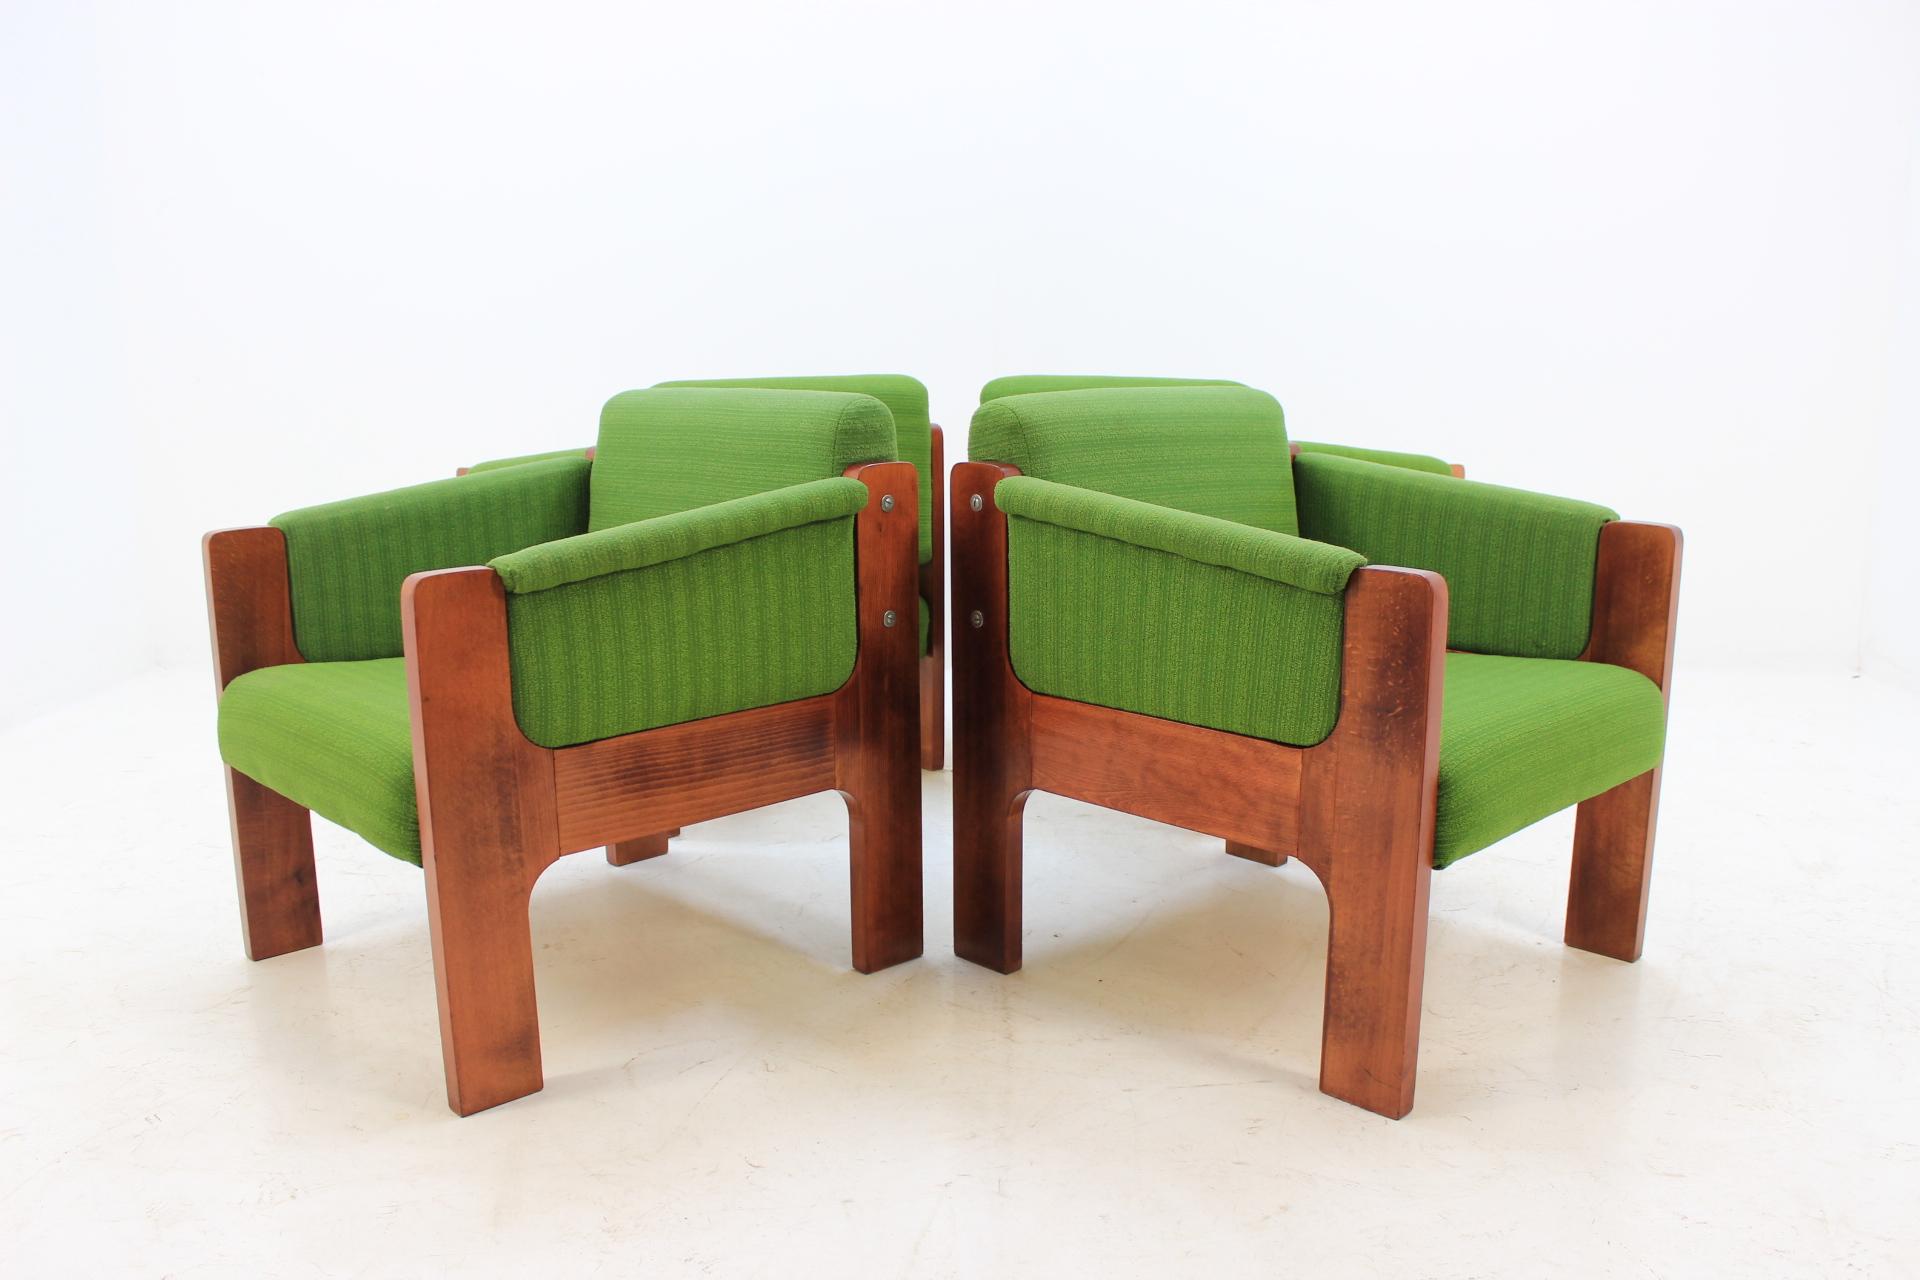 The chairs were made on order. Unique pieces.
Massive beech wooden frame. Good original upholstery.
Nice design. Four pieces available.